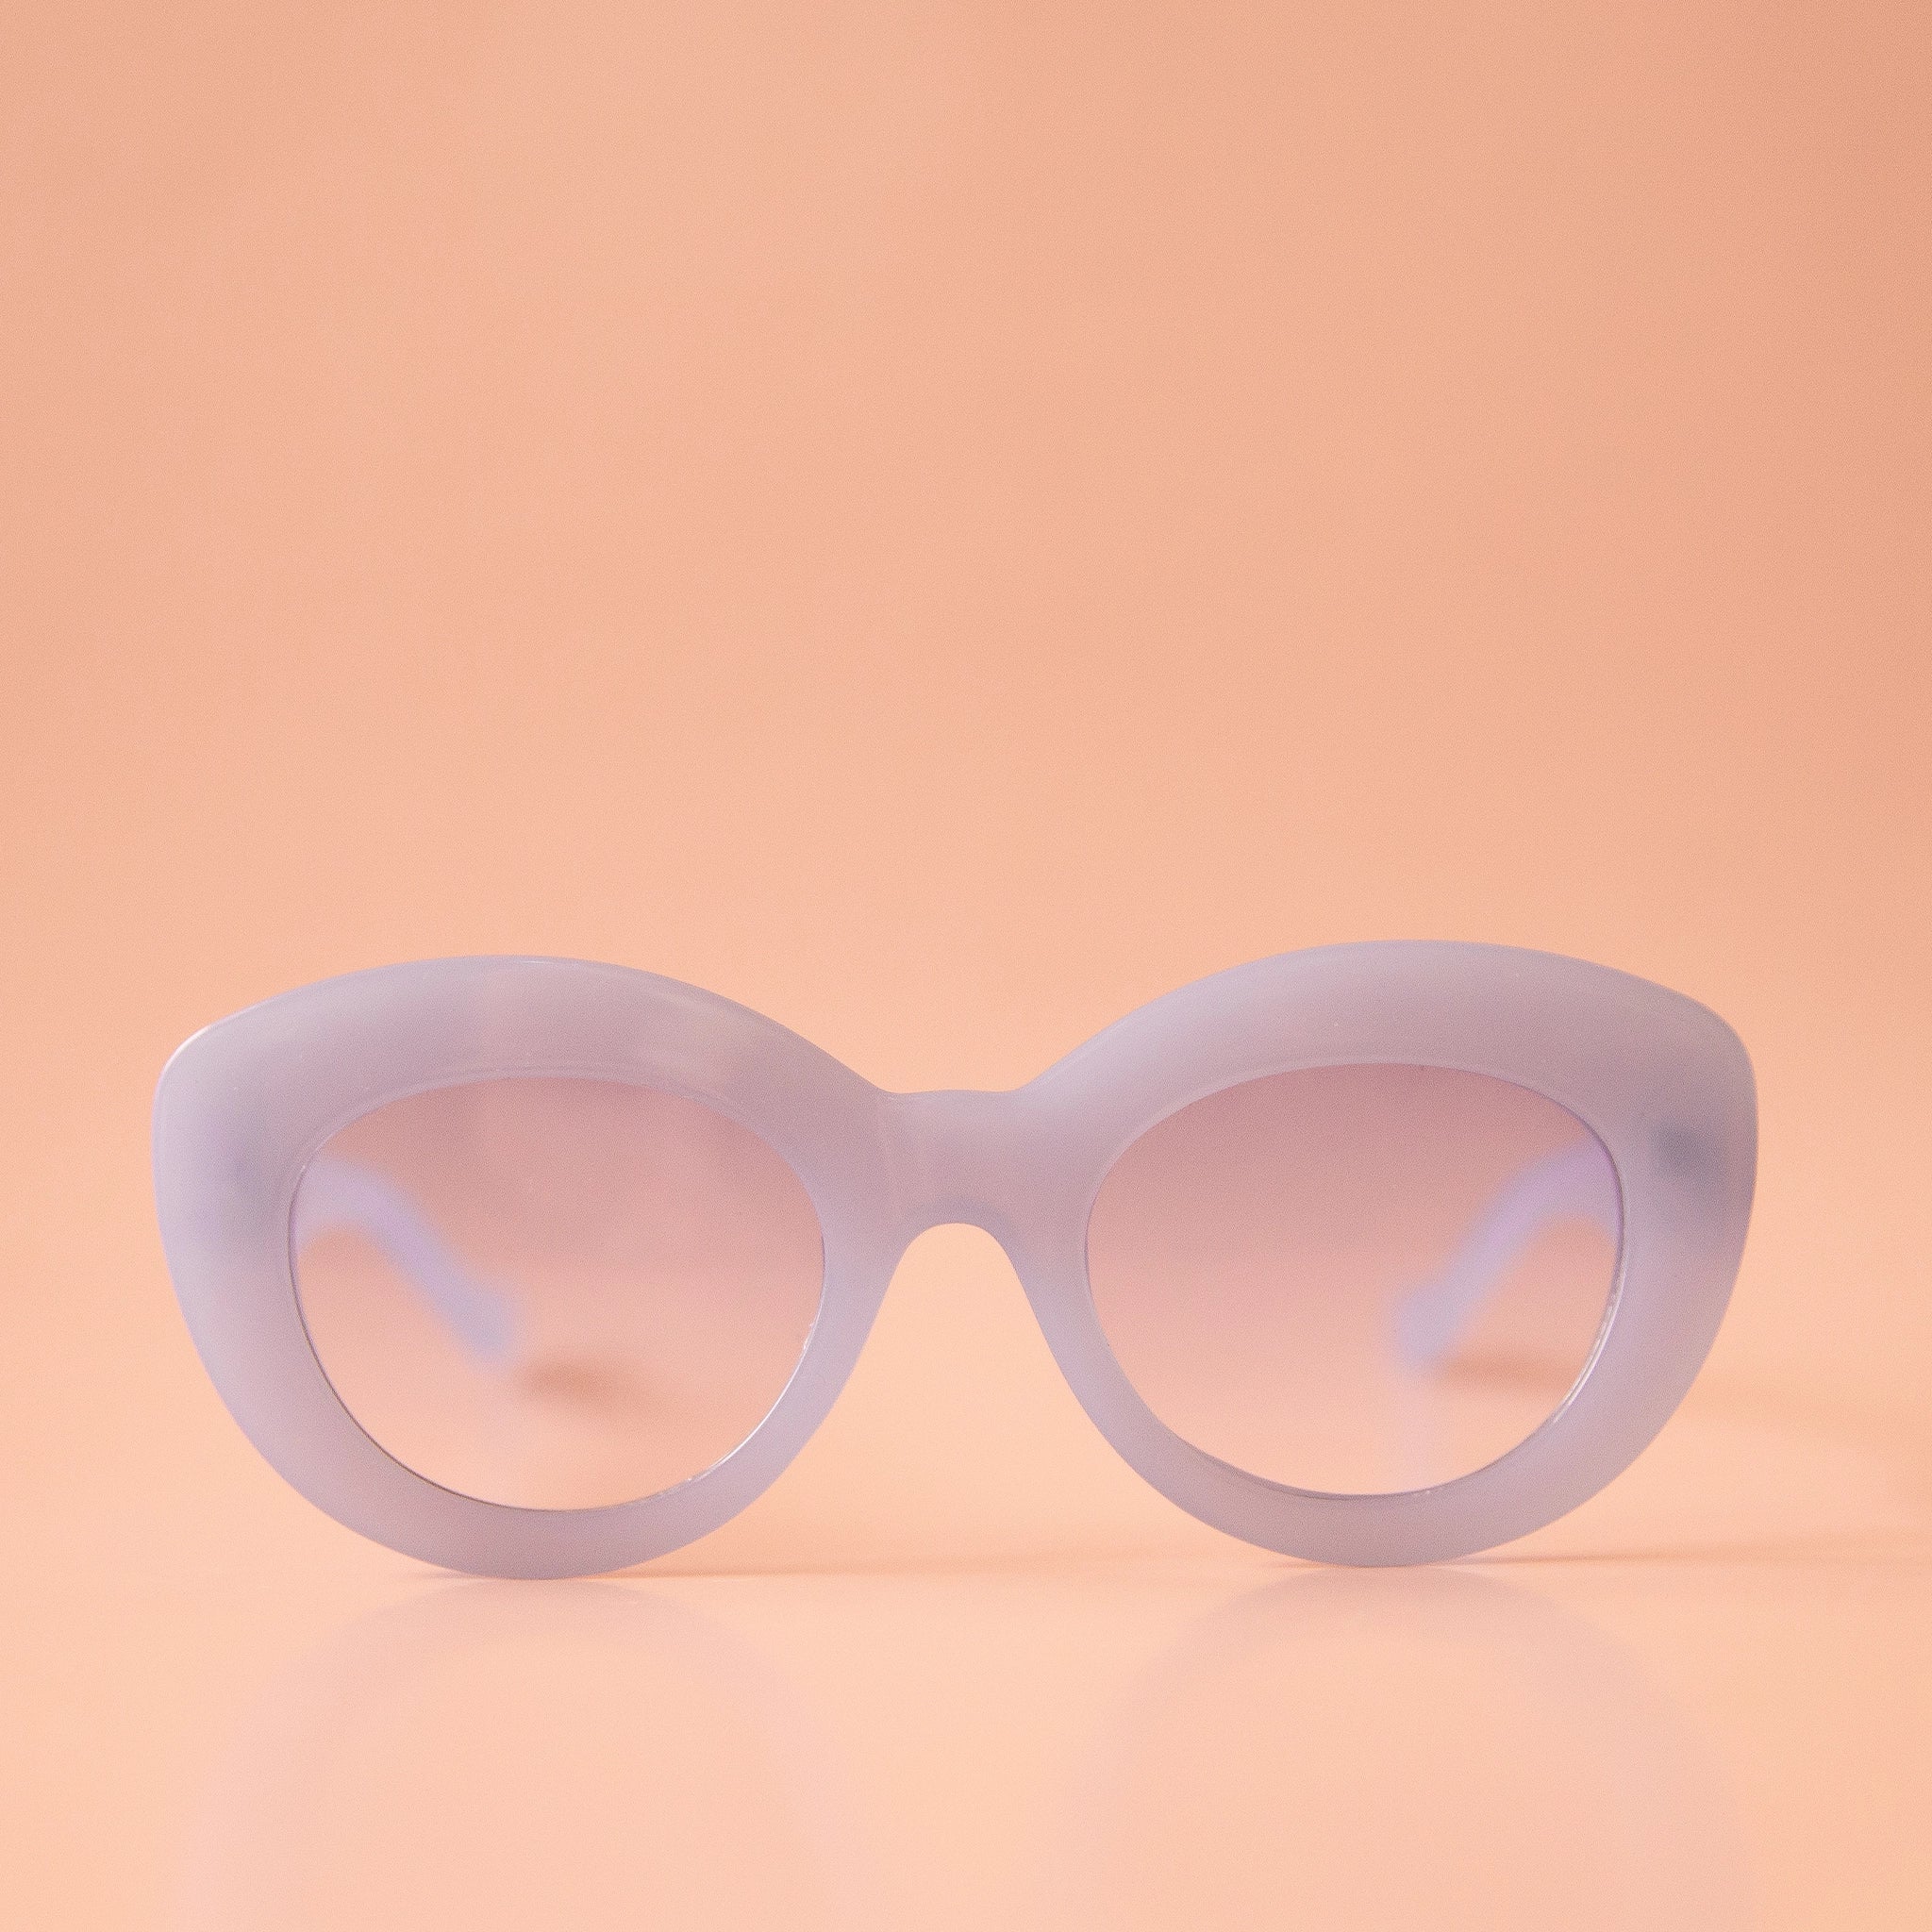 On a peachy background is a pair of light blue sunglasses with a rounded shape and a slight cat eye corner. The lenses are also a light blue shade